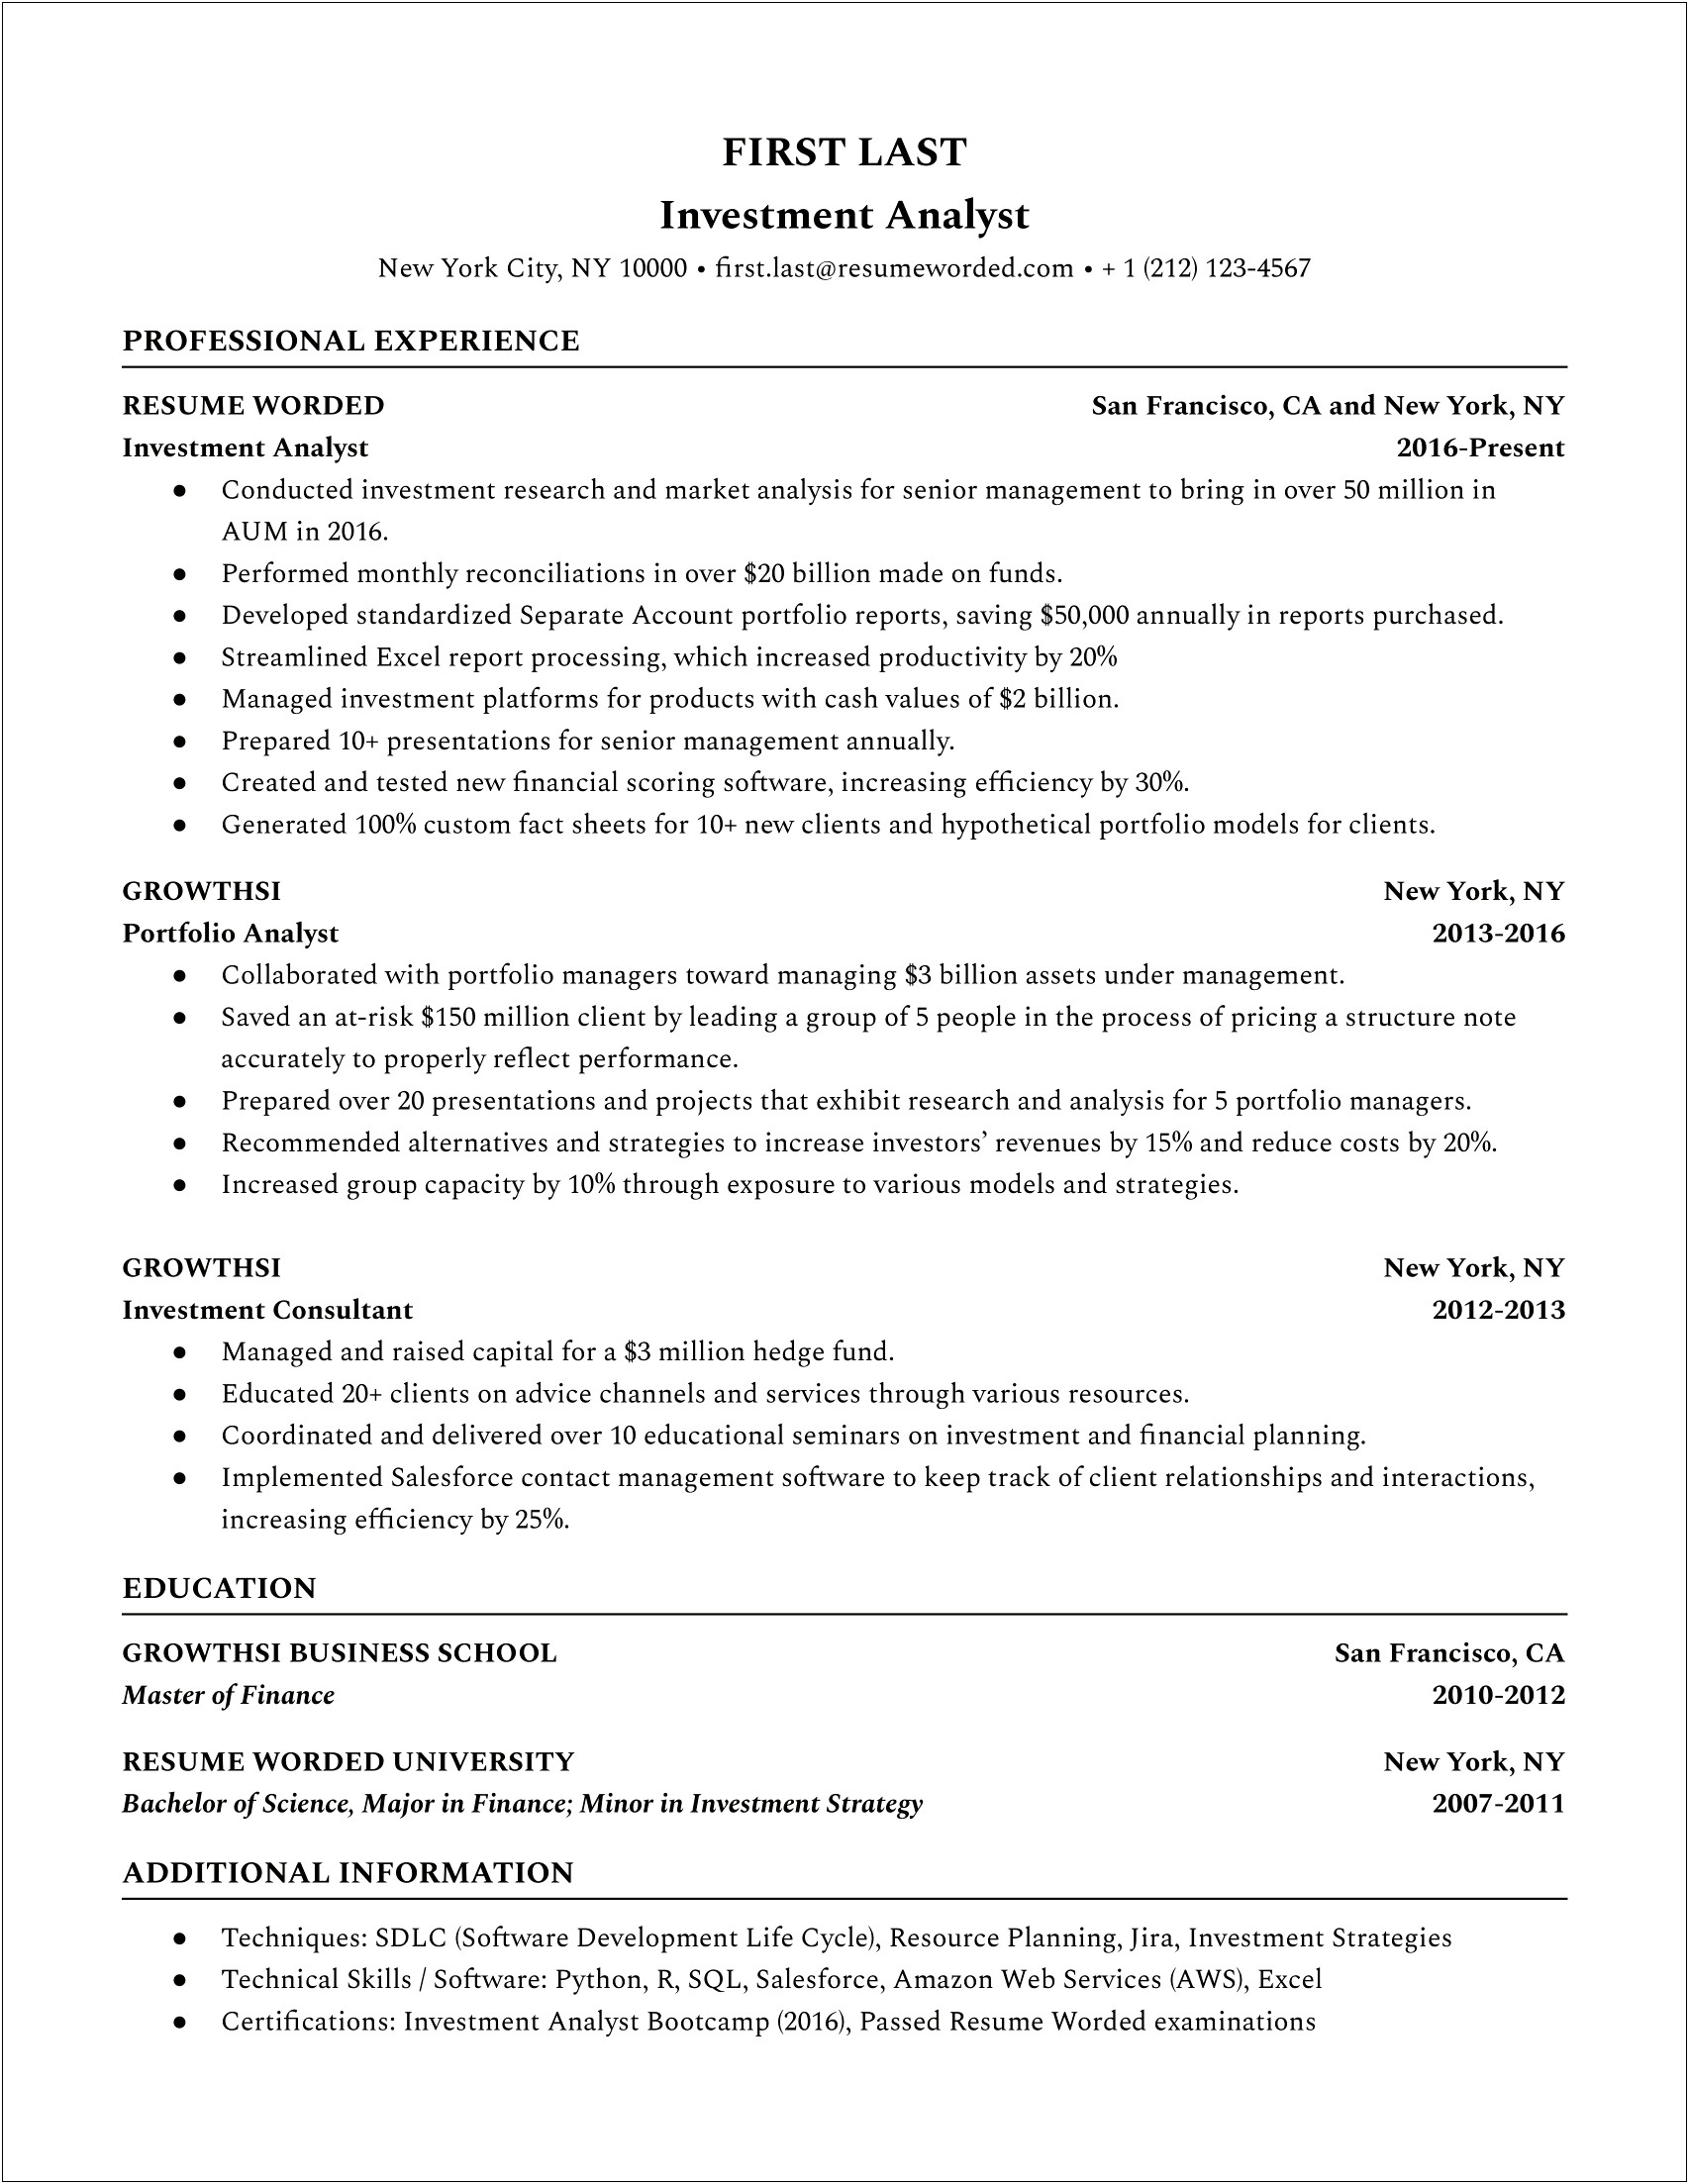 Sample Resume For Mutual Fund Analyst